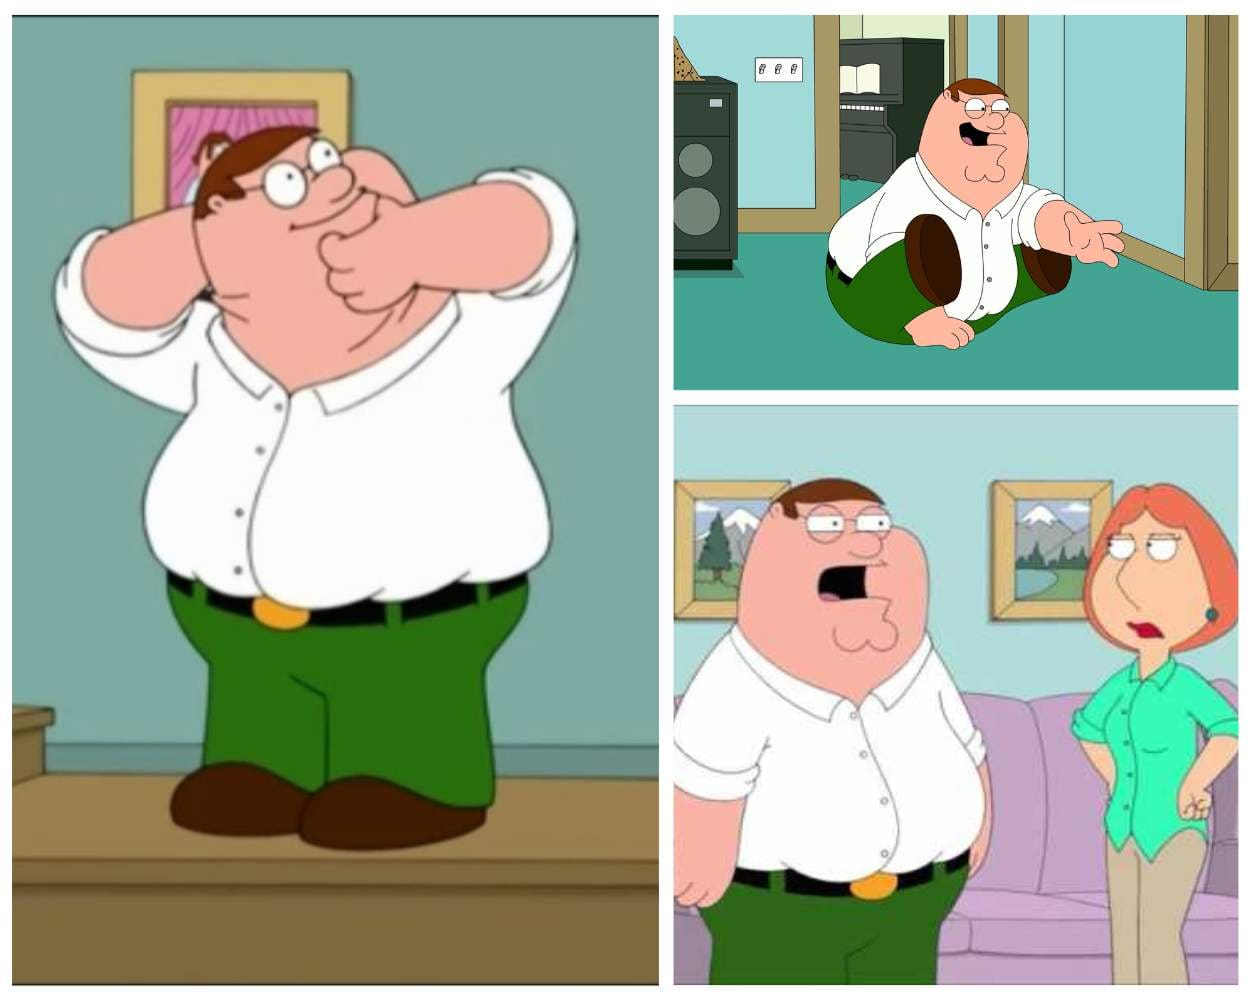 Peter Griffin - The Round Fat Character We Love